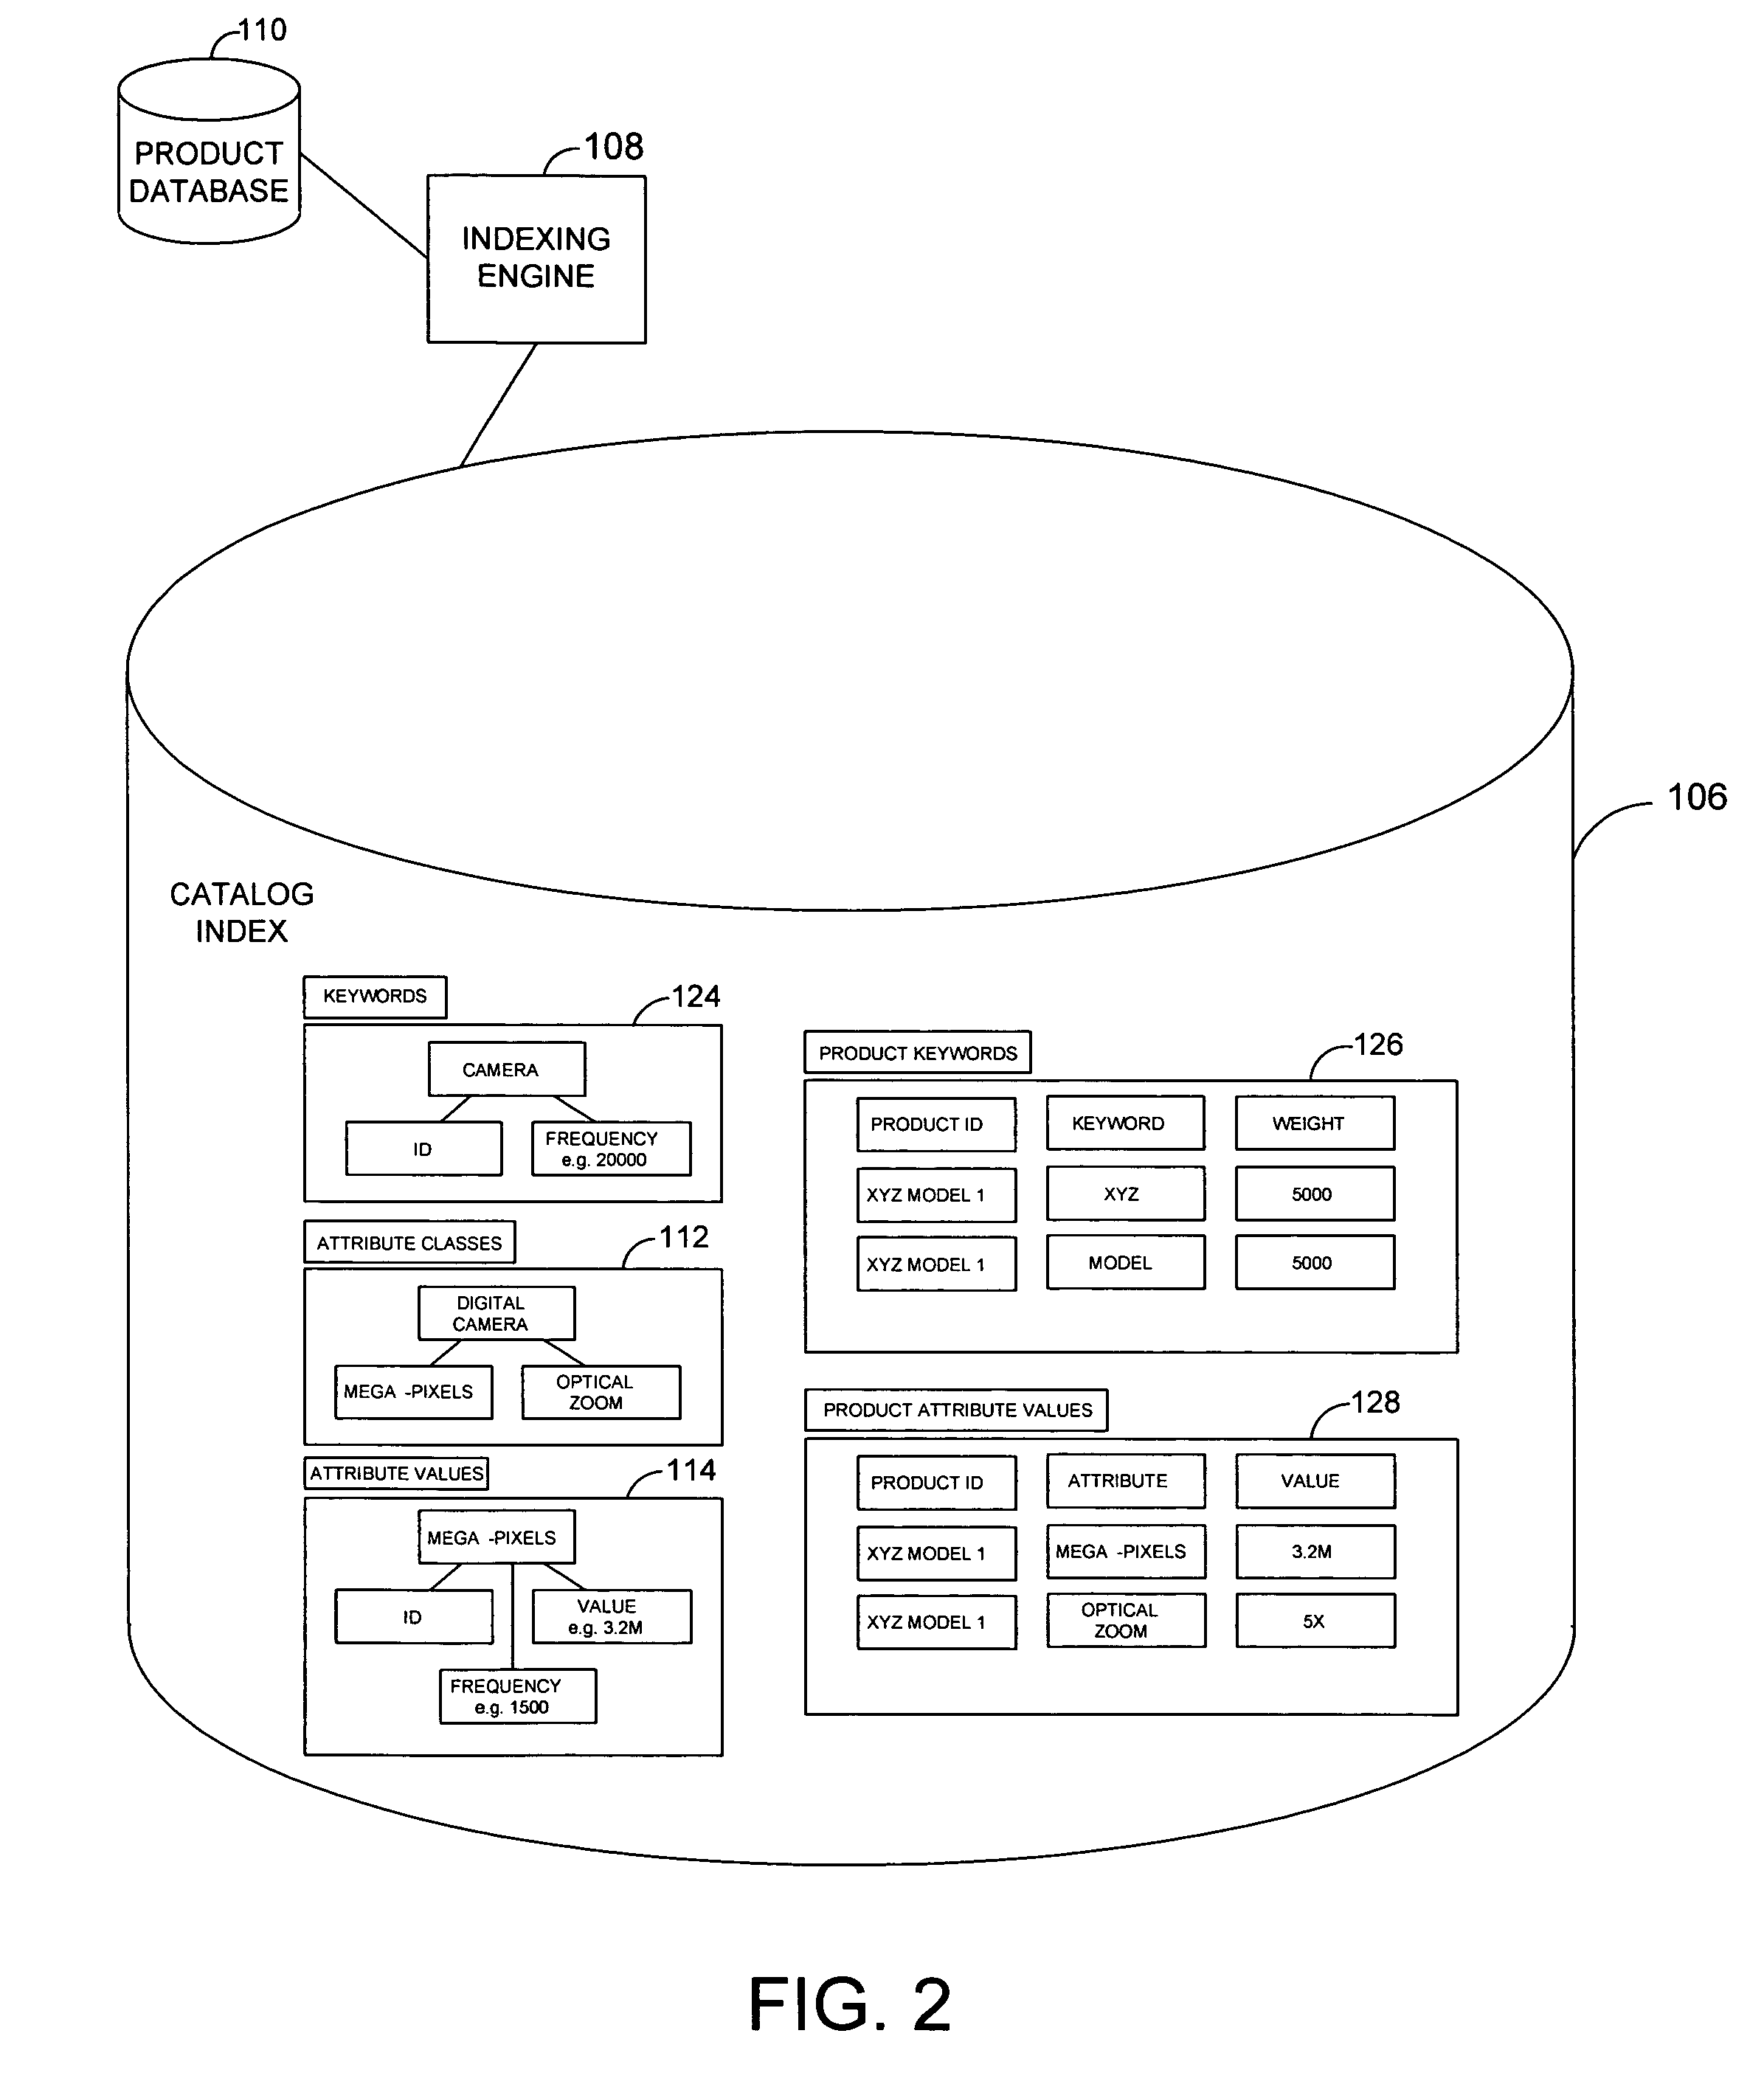 System and method for an online catalog system having integrated search and browse capability